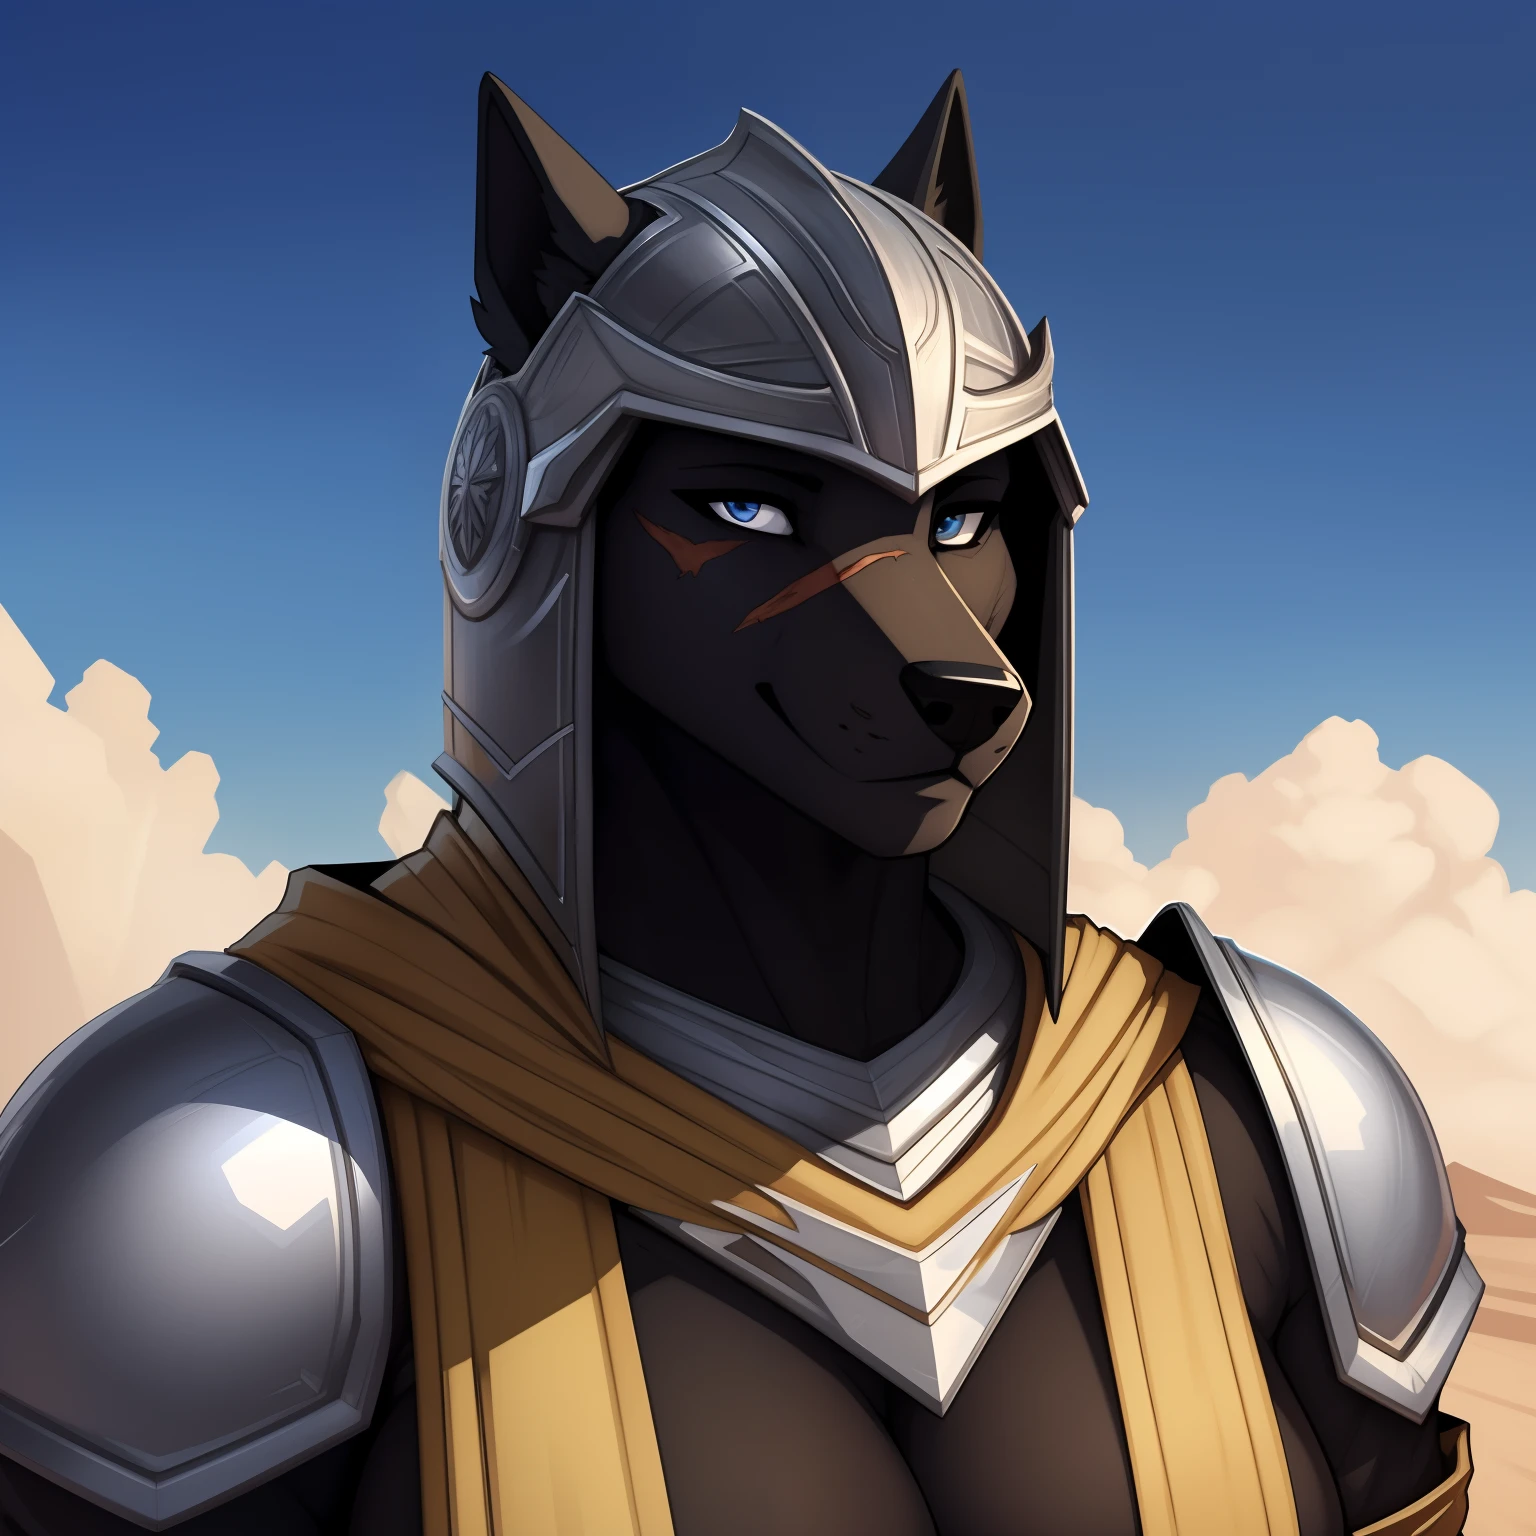 Tall_curvy_muscular_warhound female black_furry_body silver_eyes heavy_plate_armor helmet yellow_tabard_and_surcoat scarred_body solo portrait Masterpiece best_quality absurdres highly_detailed cleanly_drawn_eyes anthro_only by_claweddrip, by_greasymojo, by_underscore-b, by_runawaystride